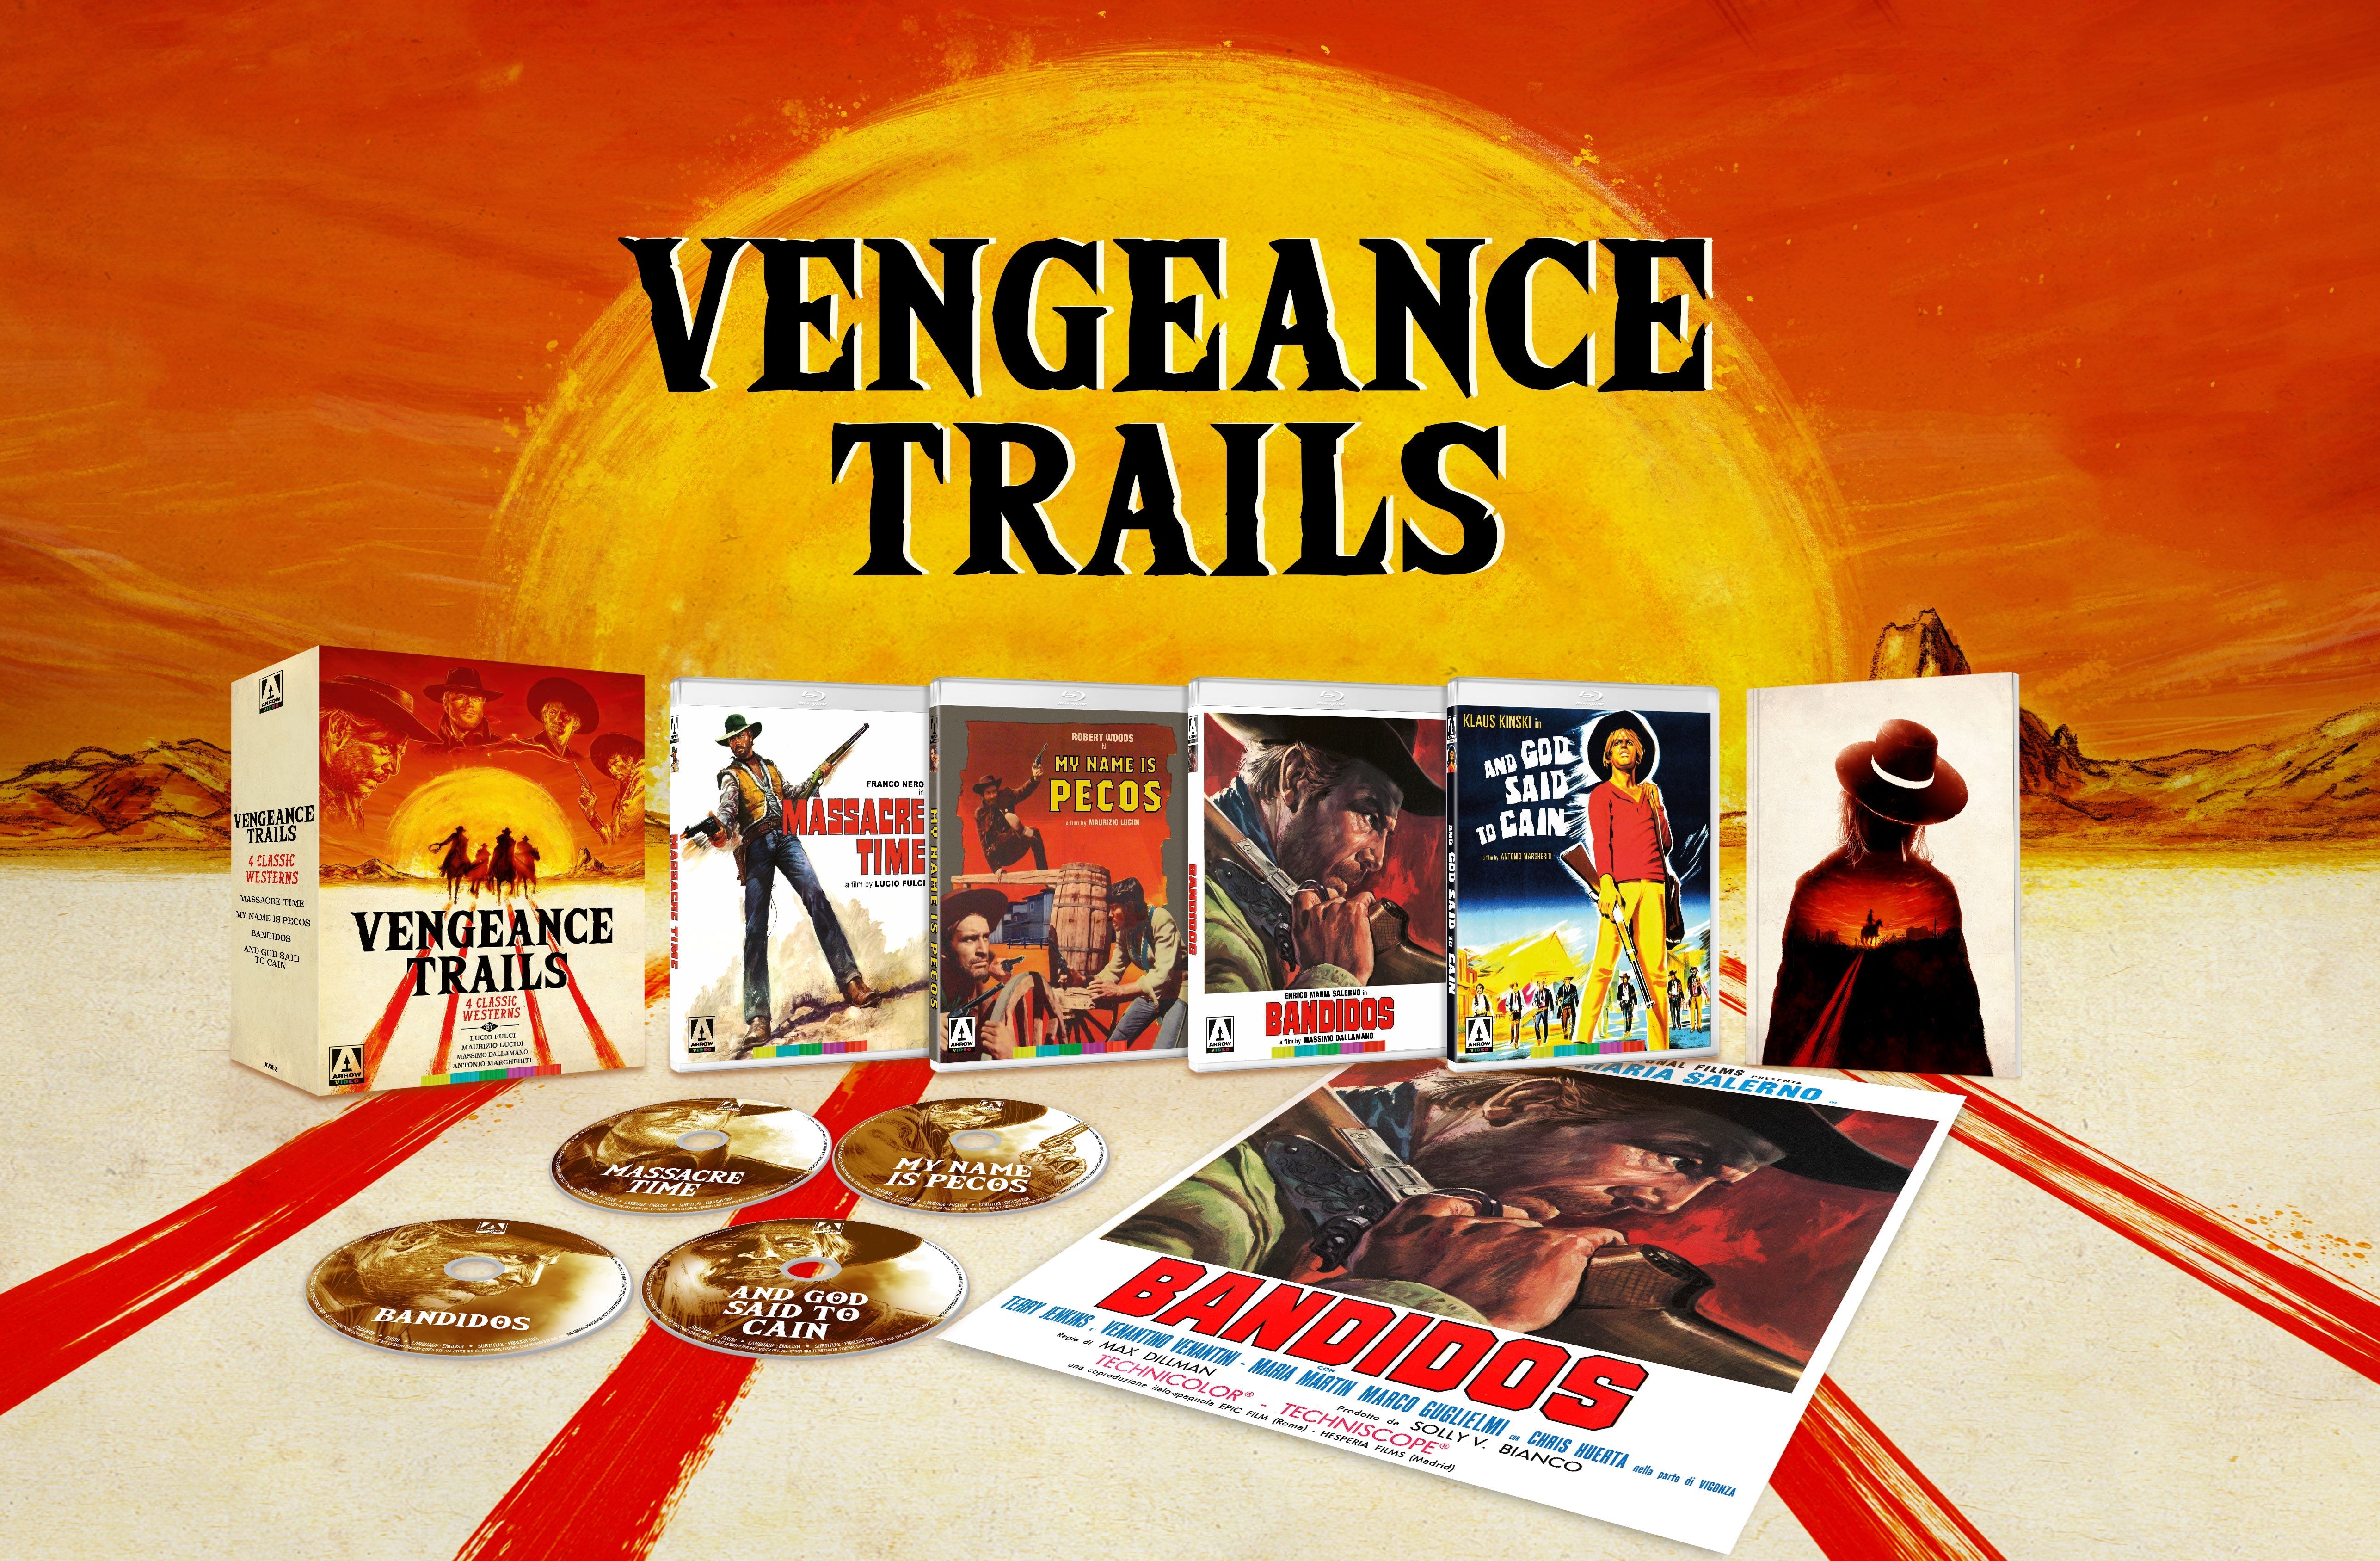 Vengeance Trails: Four Classic Westerns (Limited Edition) Blu-Ray Blu-Ray